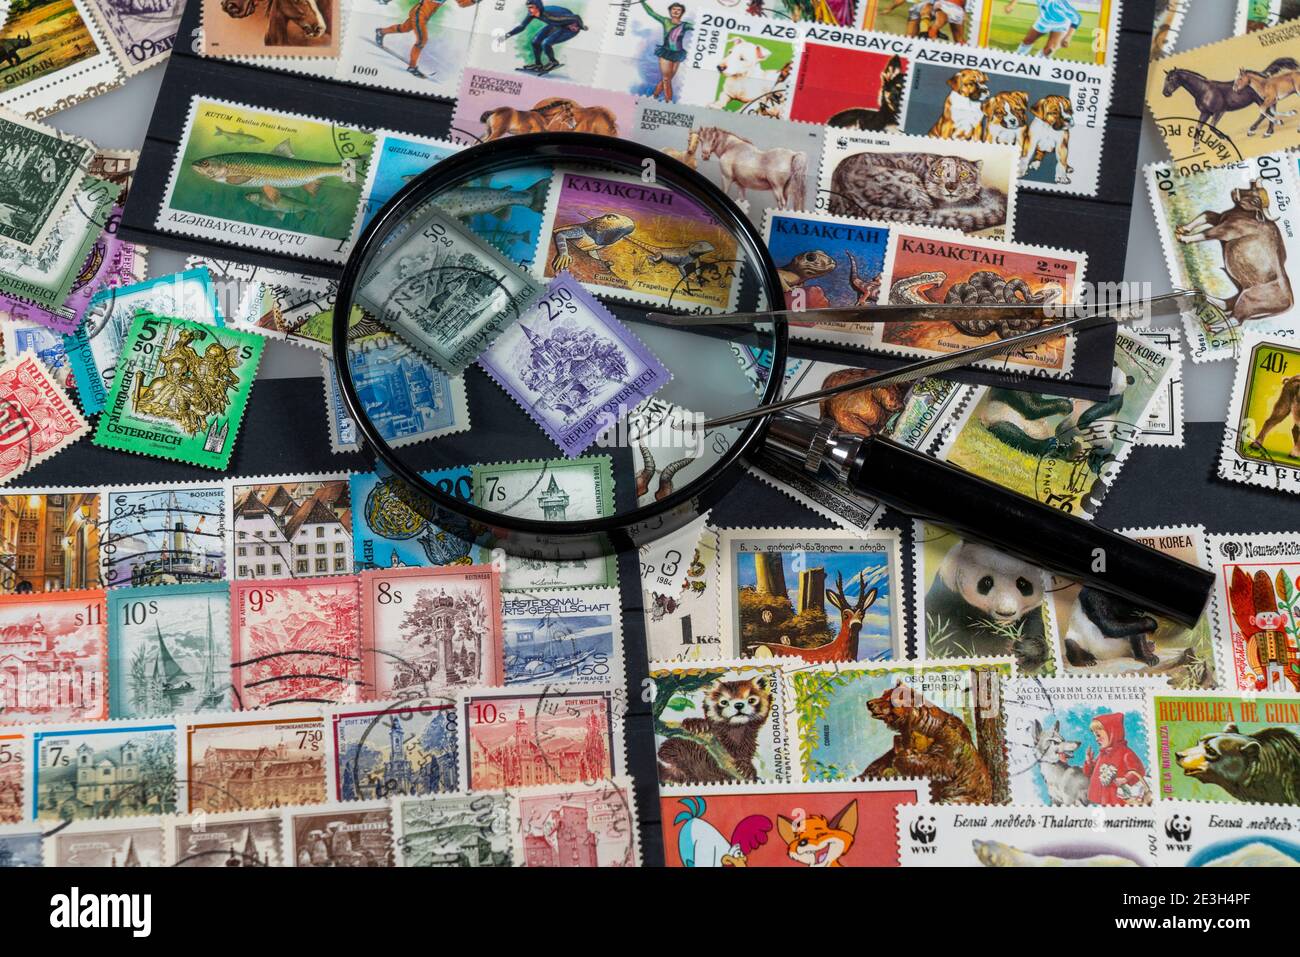 Stamp collection, collecting, postage stamps, postal stamps from different countries, Stock Photo